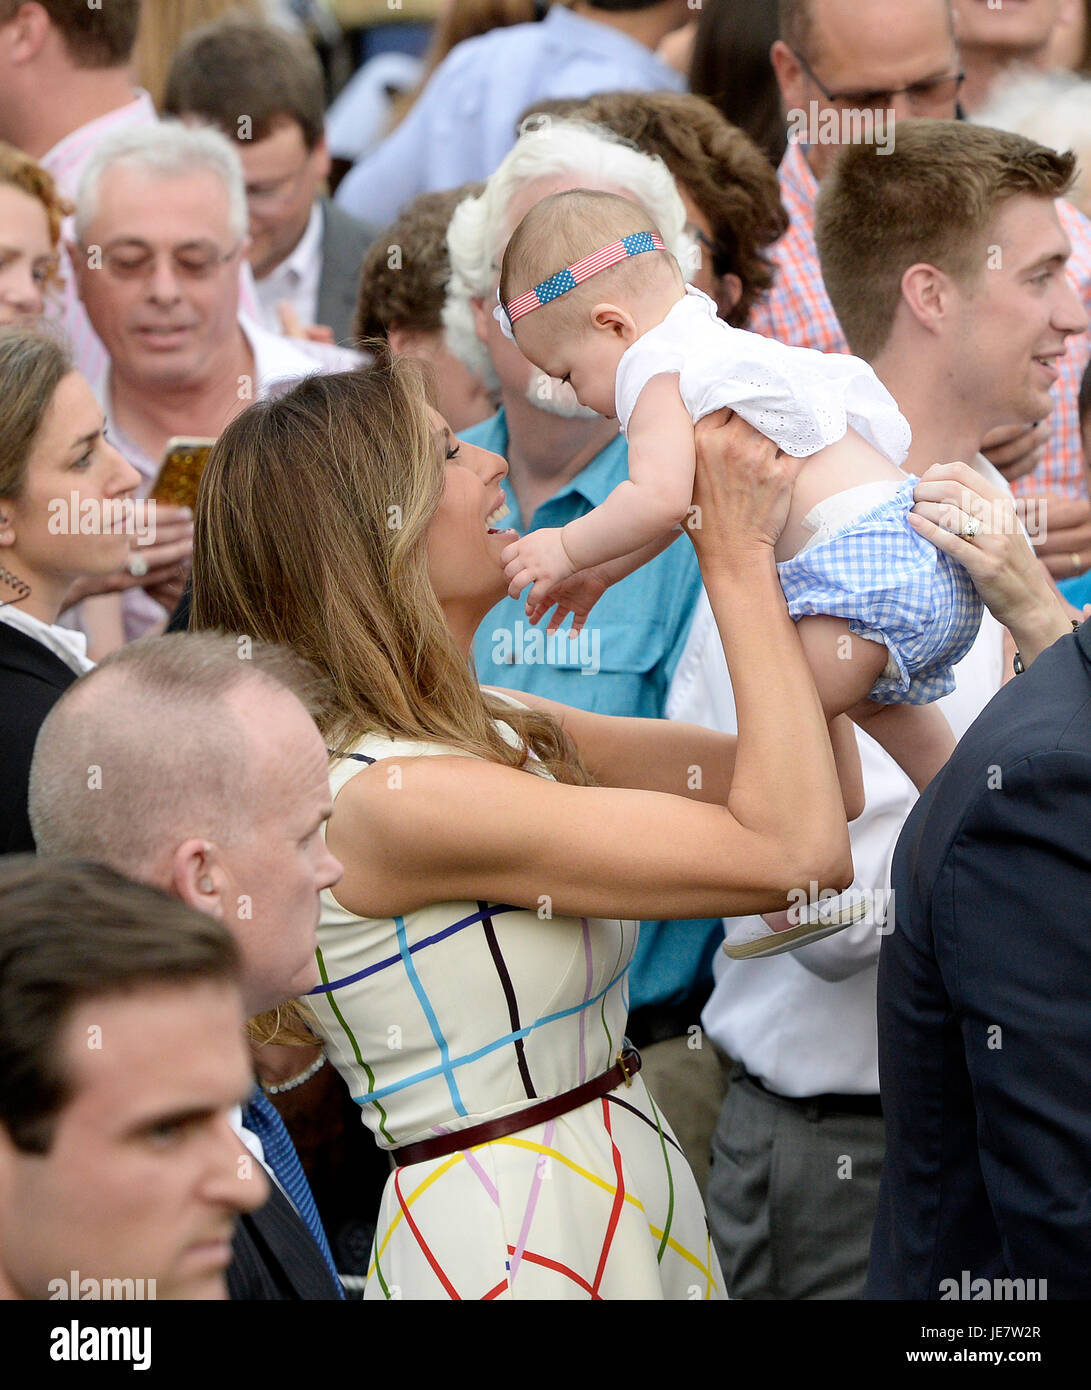 First Lady Melania Trump holds a baby during the Congressional Picnic on  the South Lawn of the White House in Washington, DC, on June 22, 2017.  Credit: Olivier Douliery - Pool via